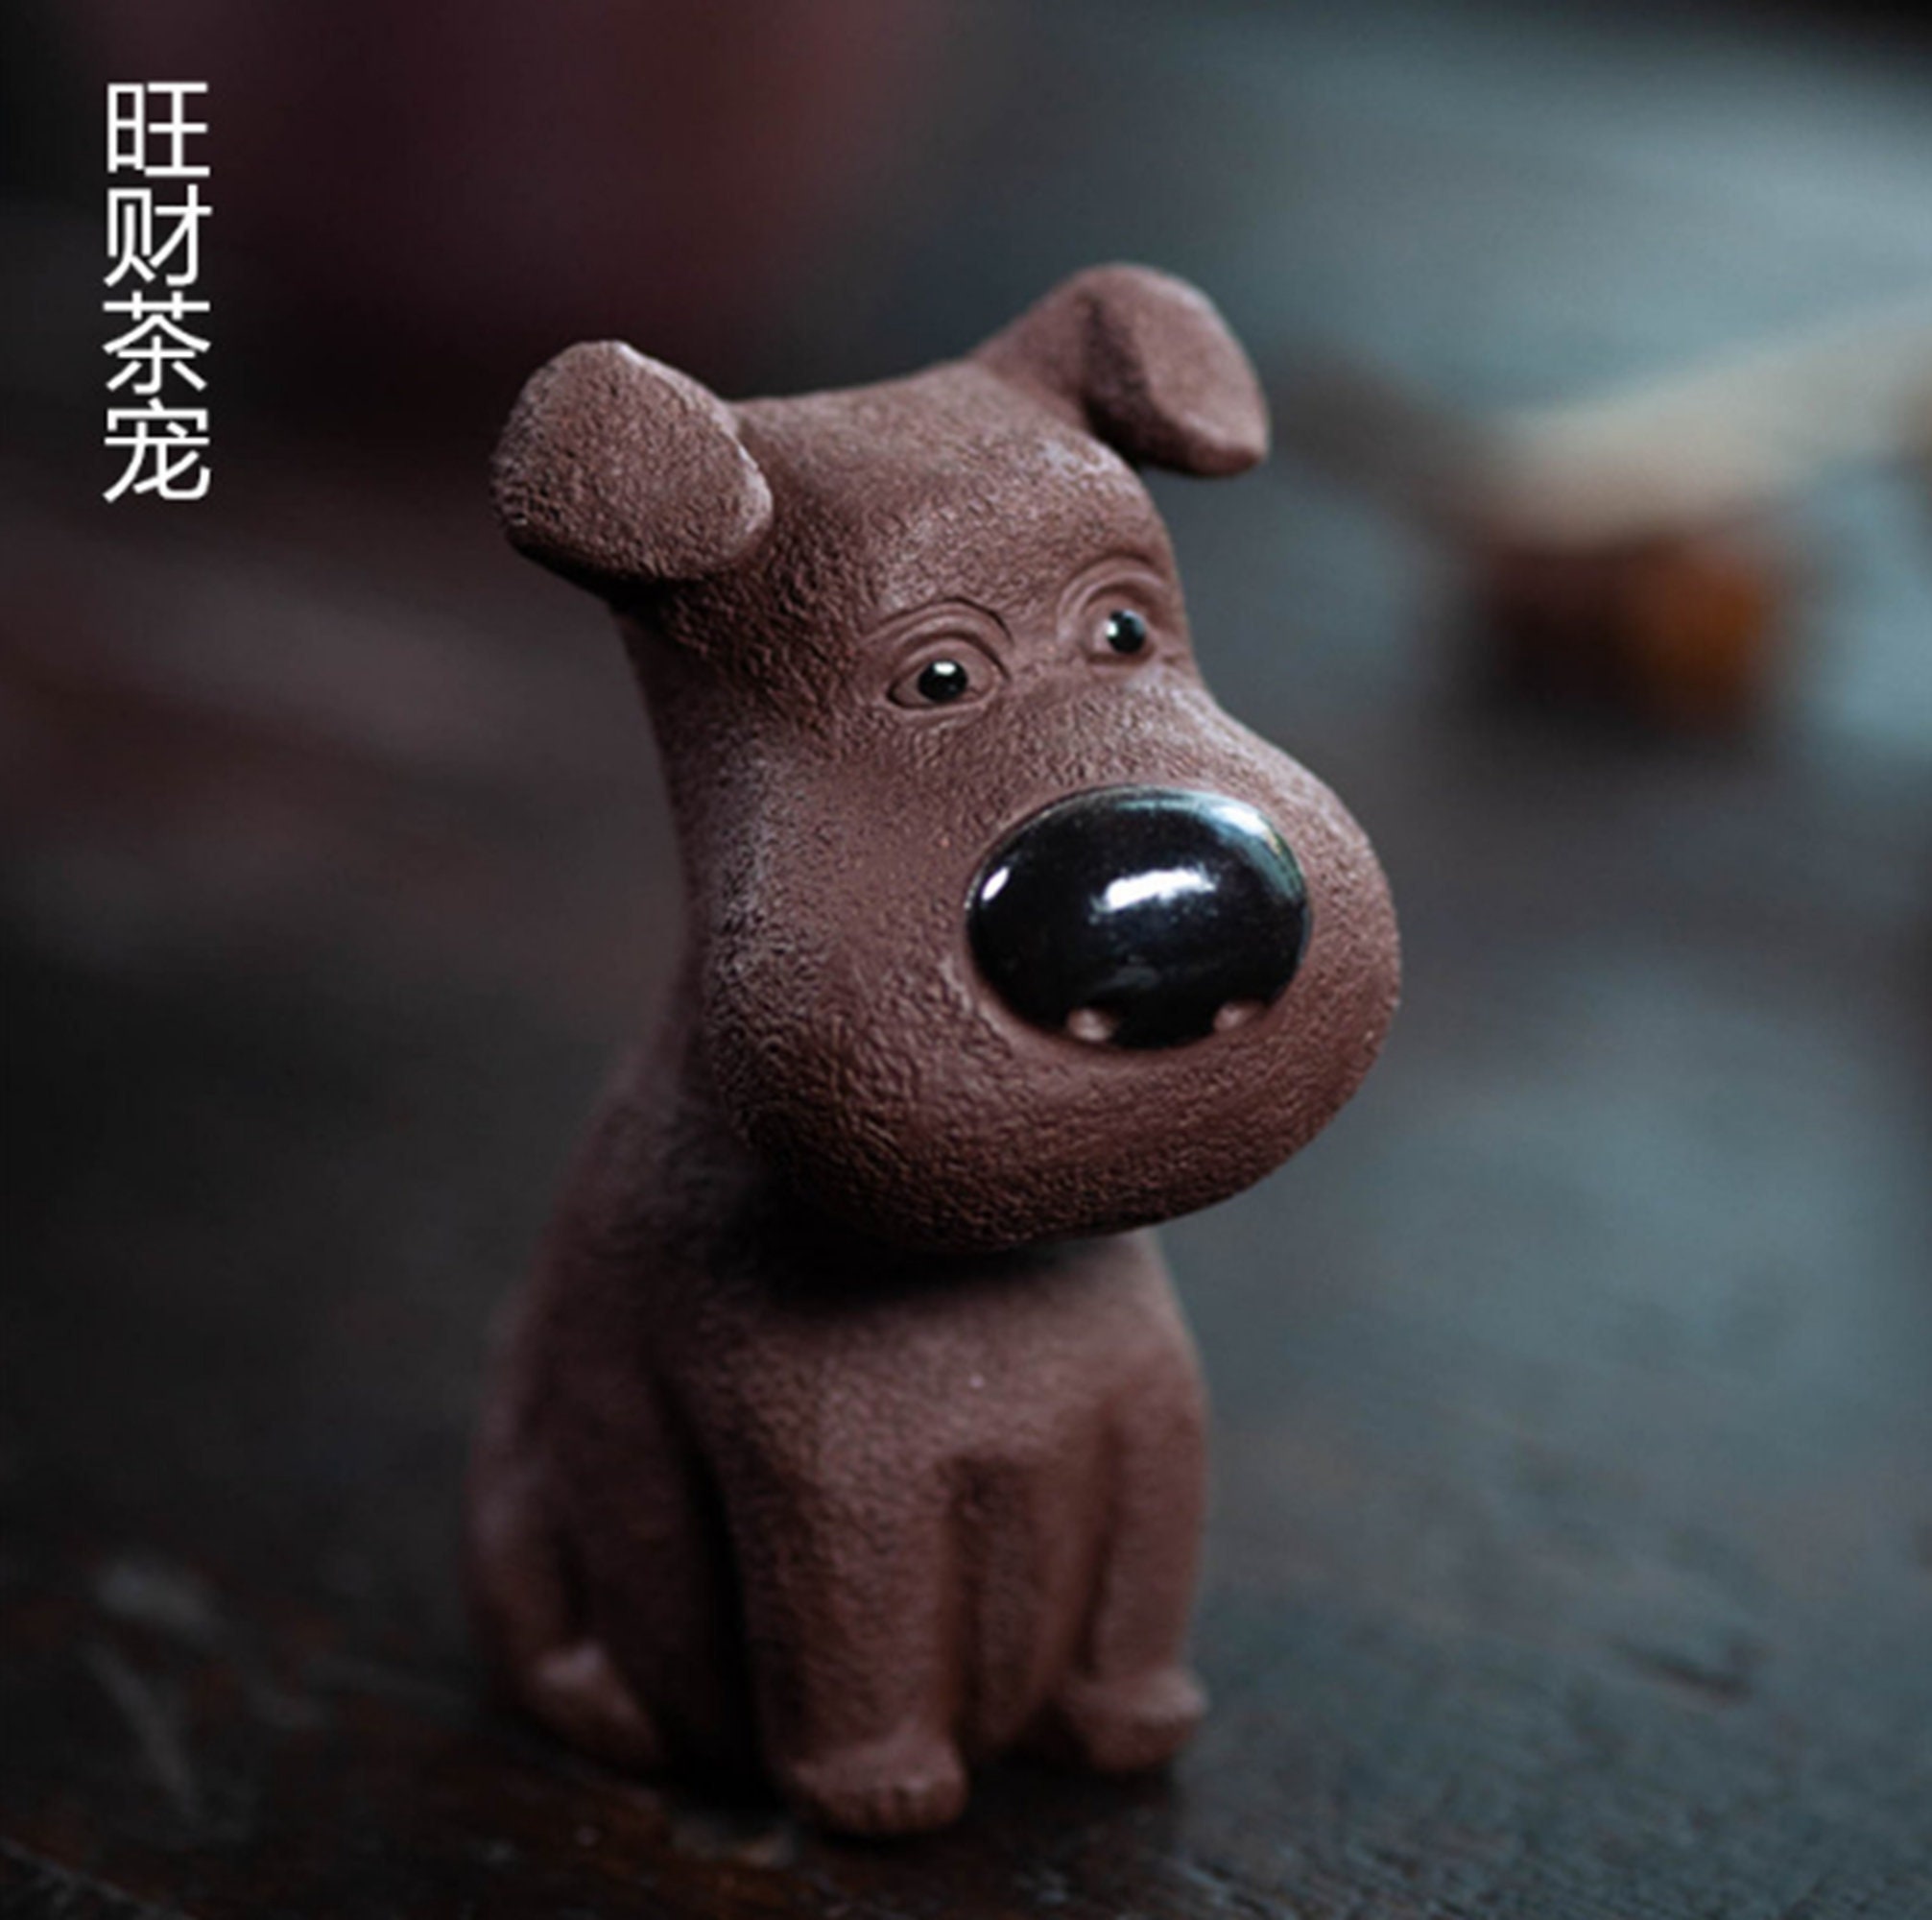 China Yixing Purple Clay Handmade Tea Pet Cute Buddha Decoration\uff0cCan be used as home office decorations